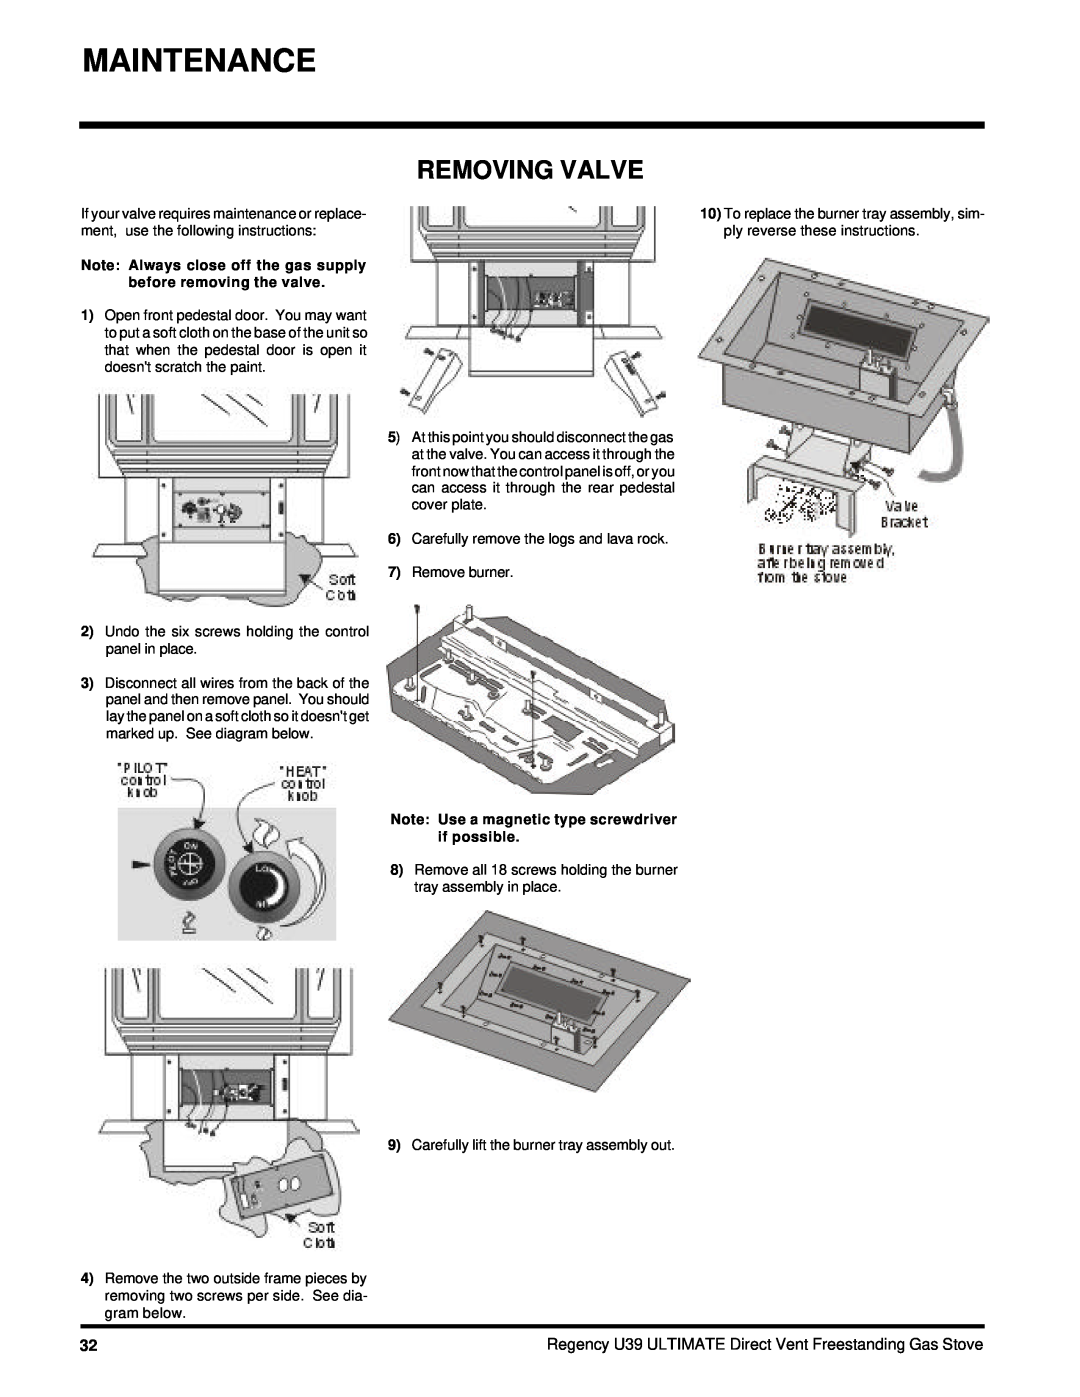 Regency U39-LP, U39-NG installation manual Removing Valve, Note: Use a magnetic type screwdriver if possible 